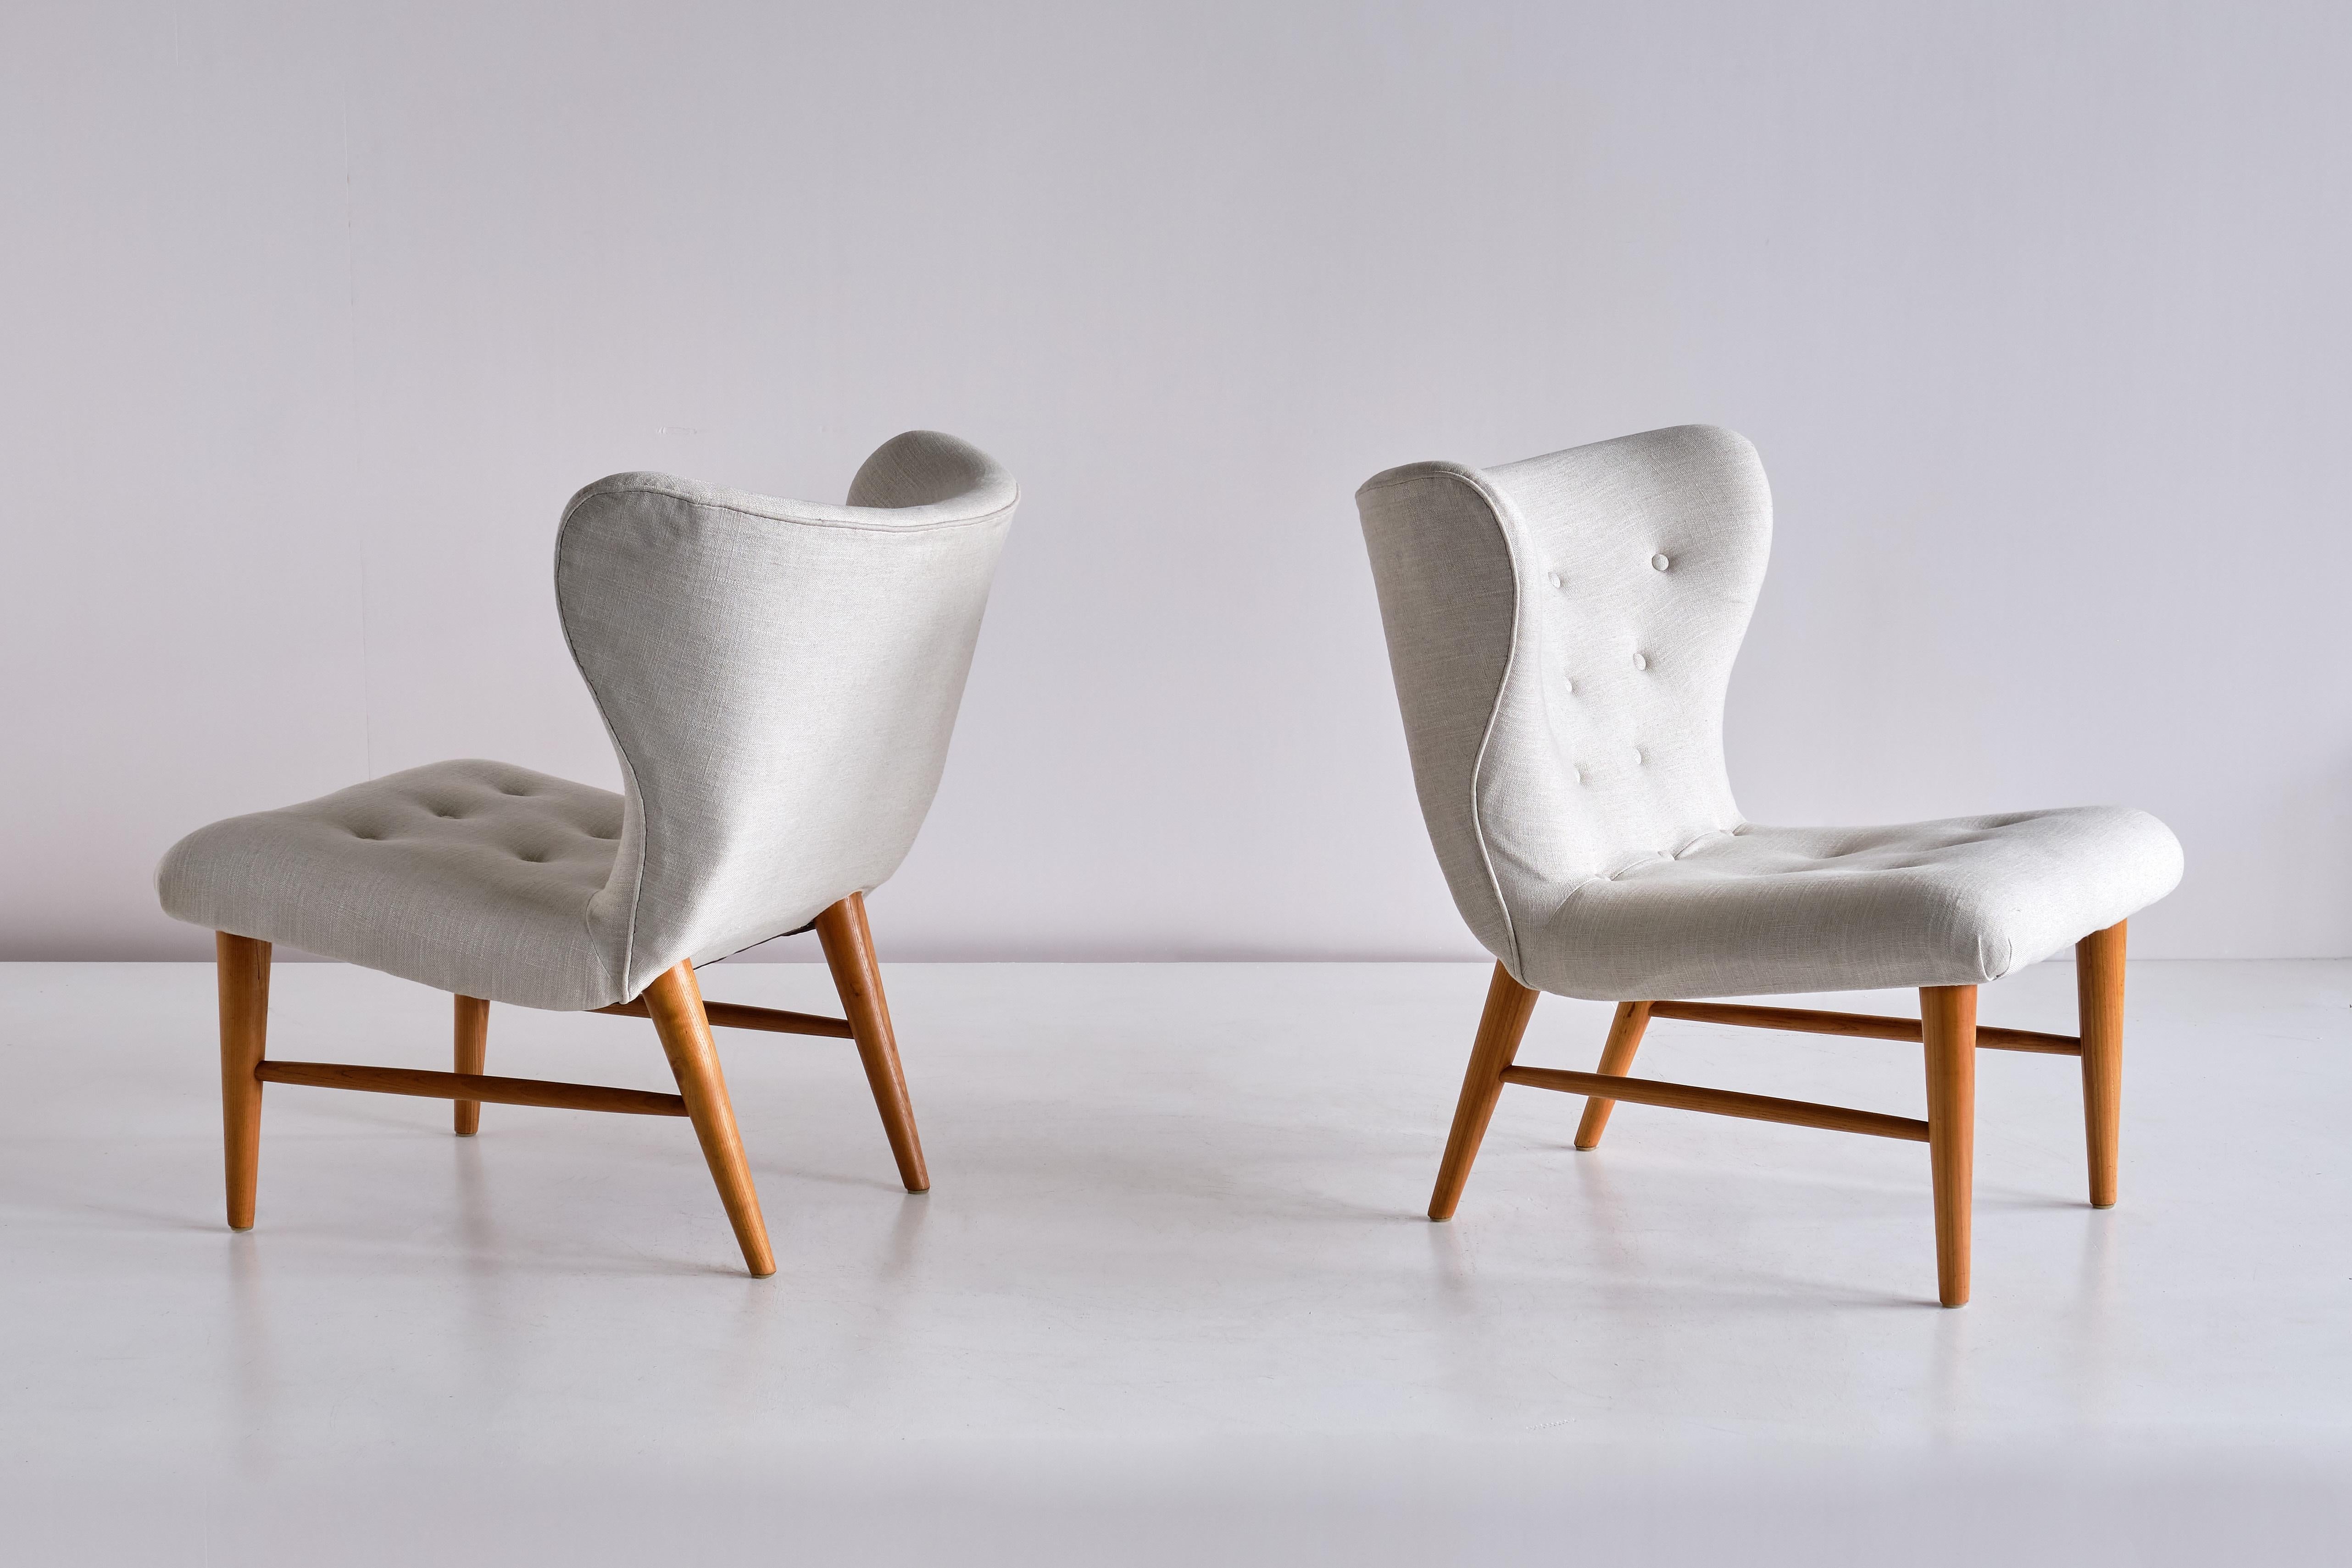 Scandinavian Modern Eric Bertil Karlén Pair of Lounge Chairs in Ivory Linen and Elm, Sweden, 1940s For Sale